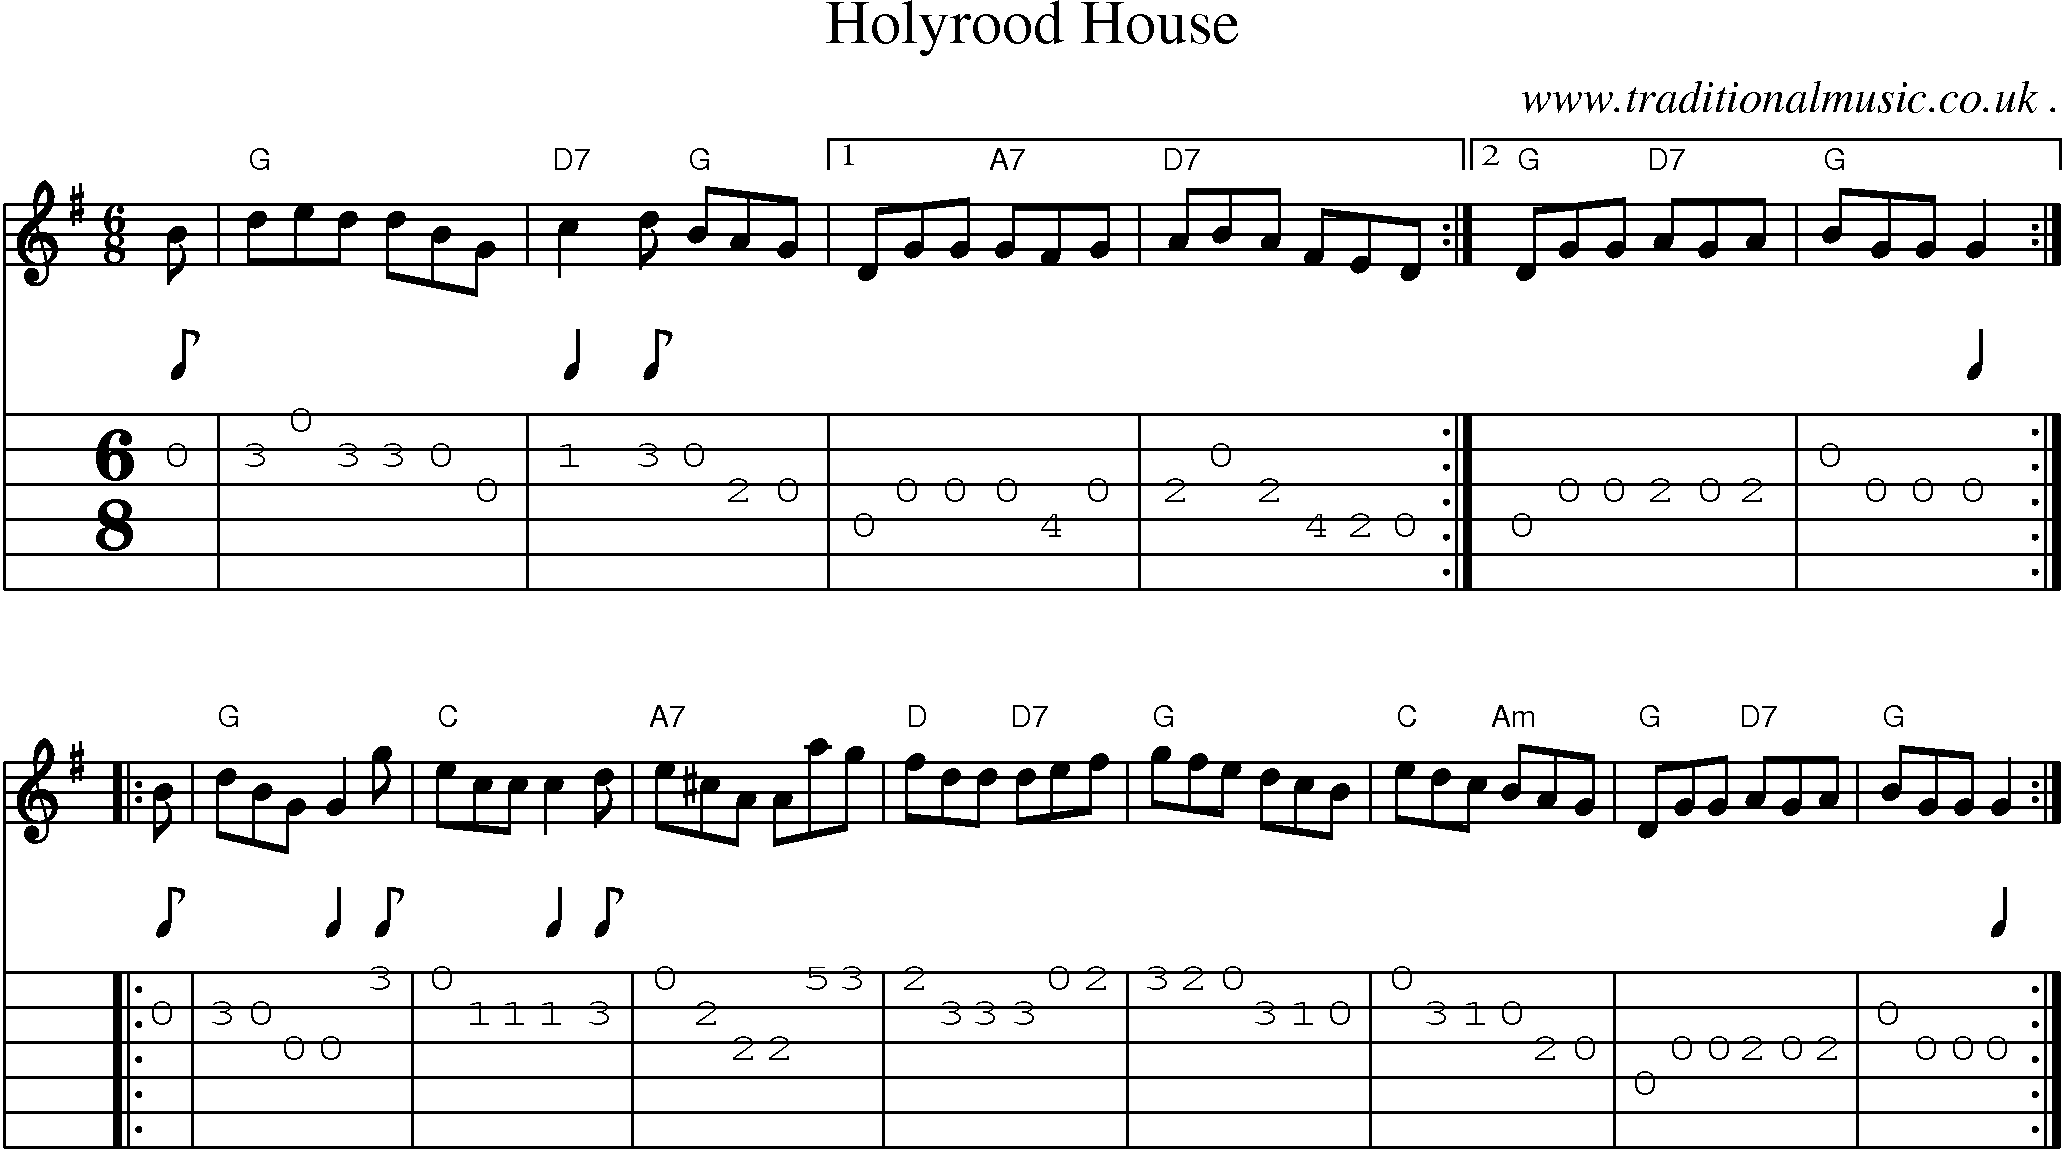 Sheet-music  score, Chords and Guitar Tabs for Holyrood House